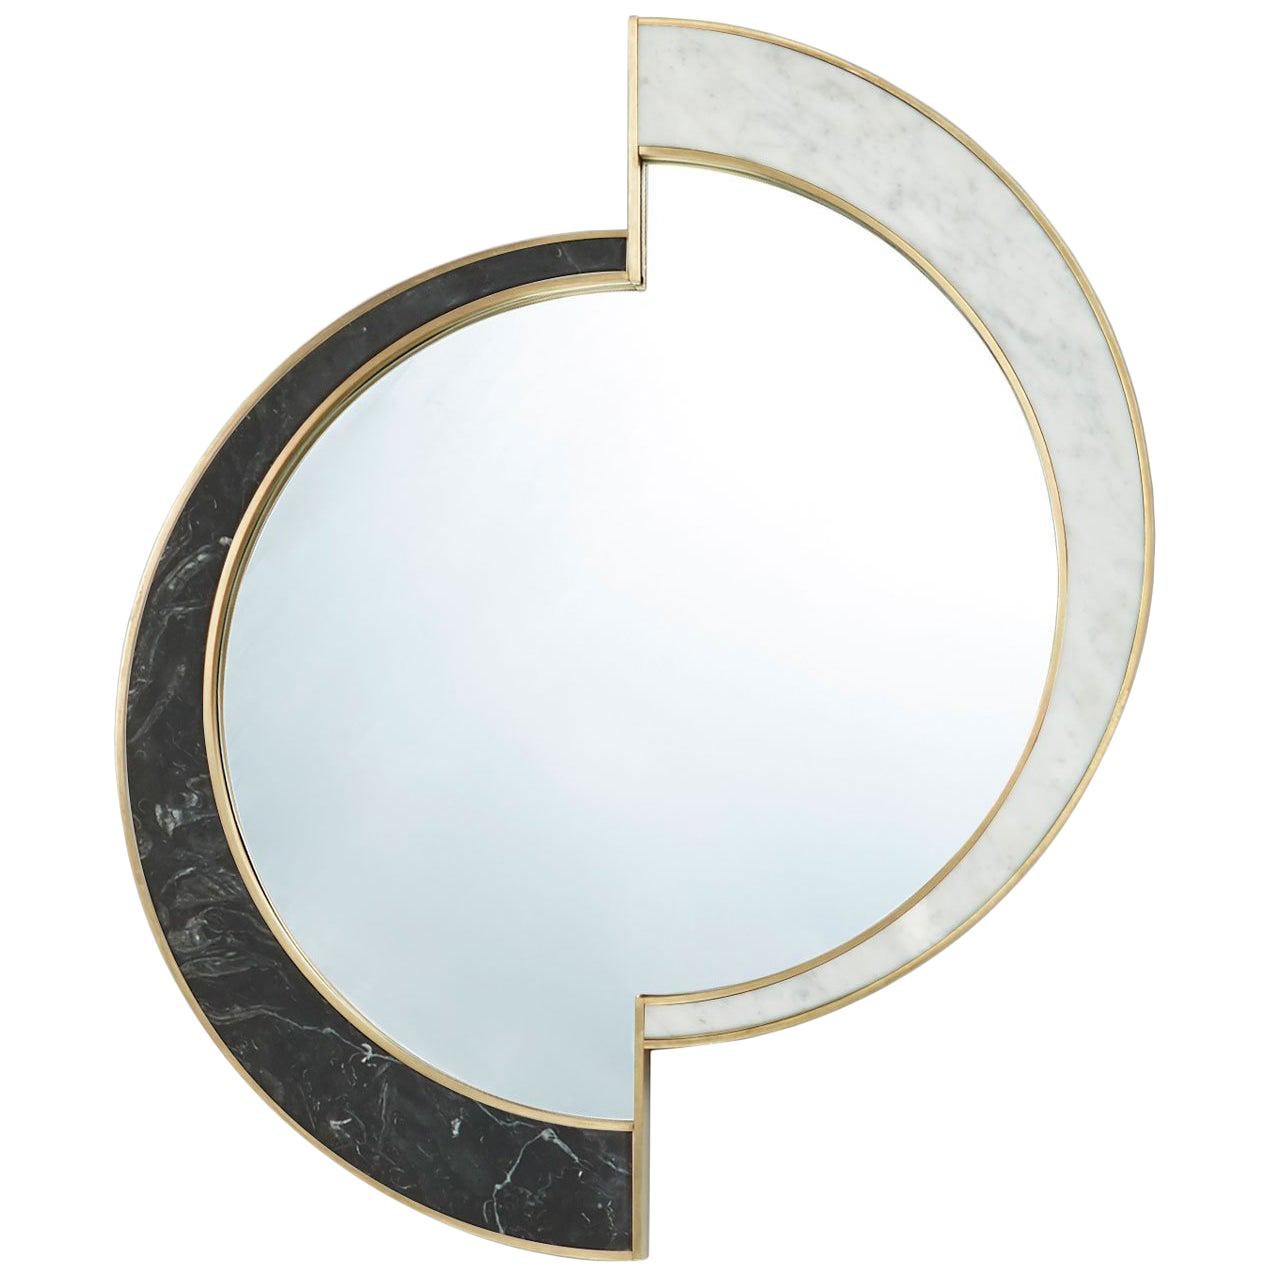 Half Moon Mirror, Nero Marquina/Carrara Marble and Brushed Brass, by Lara Bohinc For Sale